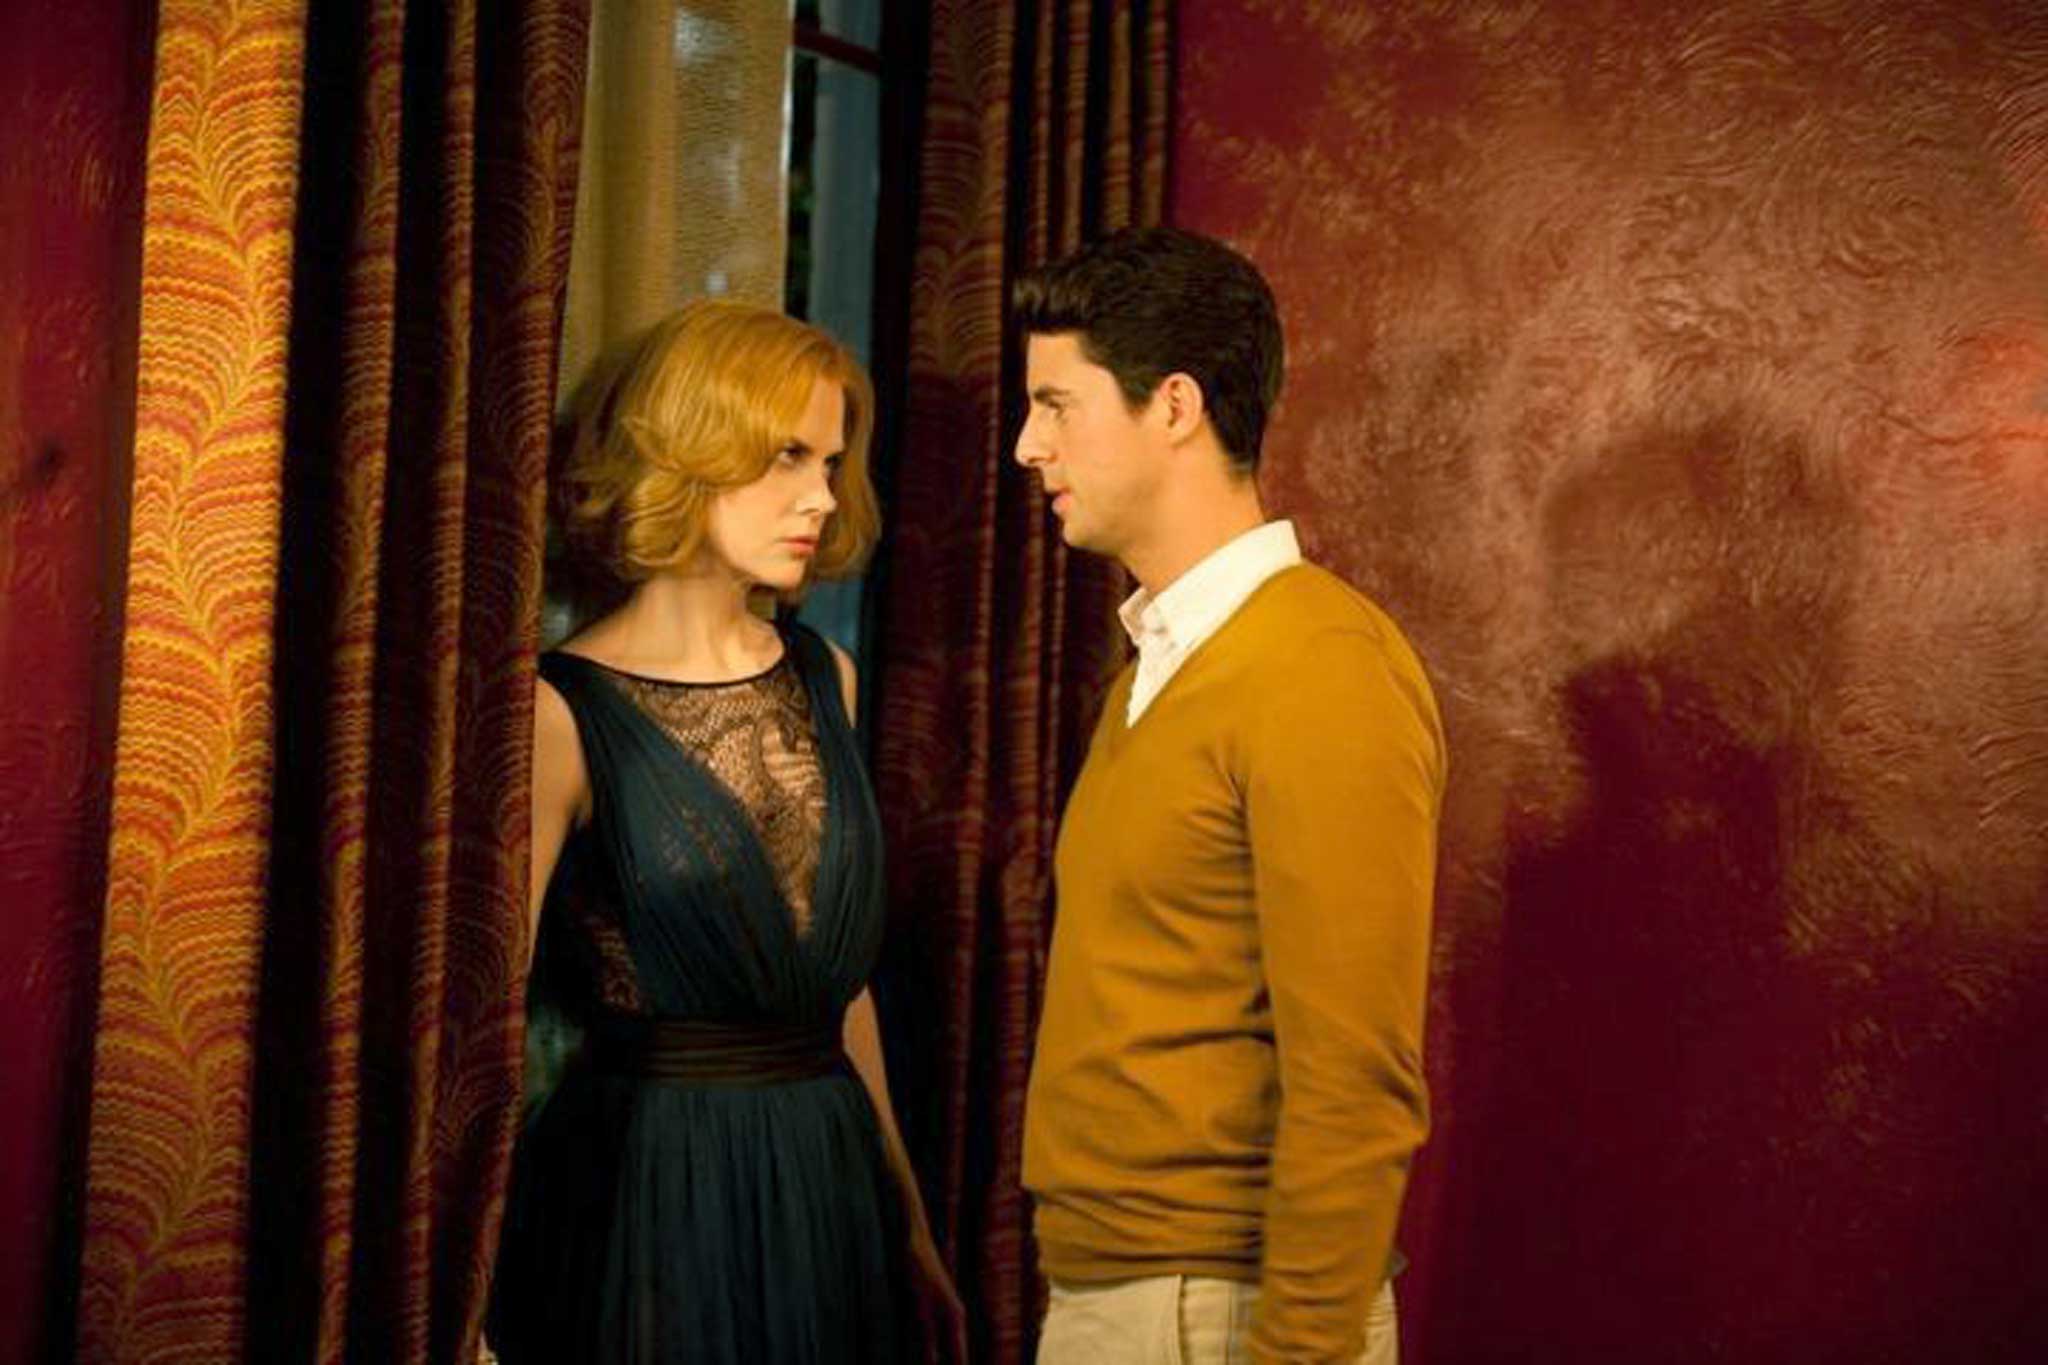 Family ties: Nicole Kidman and Matthew Goode star in Park Chan-wook's psychological thriller 'Stoker'